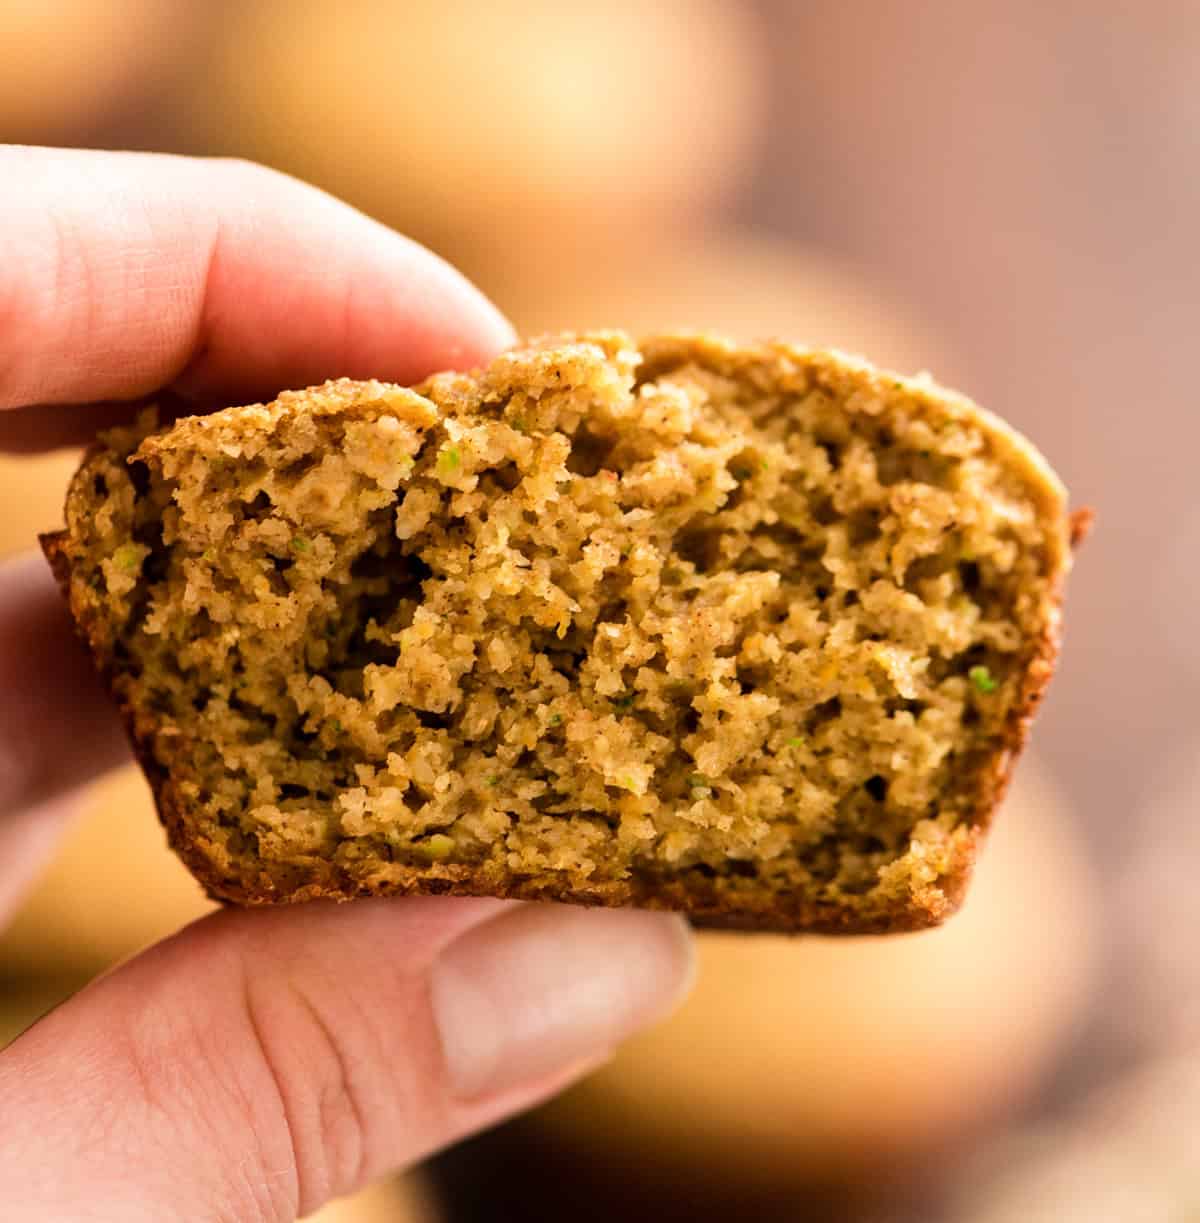 a hand holding a half of a Carrot Zucchini Muffin so the texture is visible